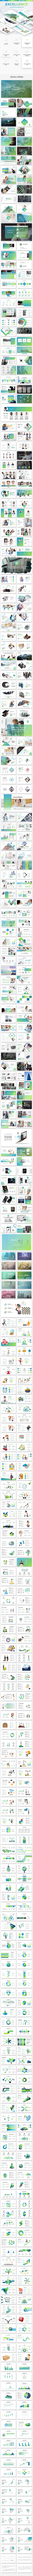 Business Excellence Powerpoint Template